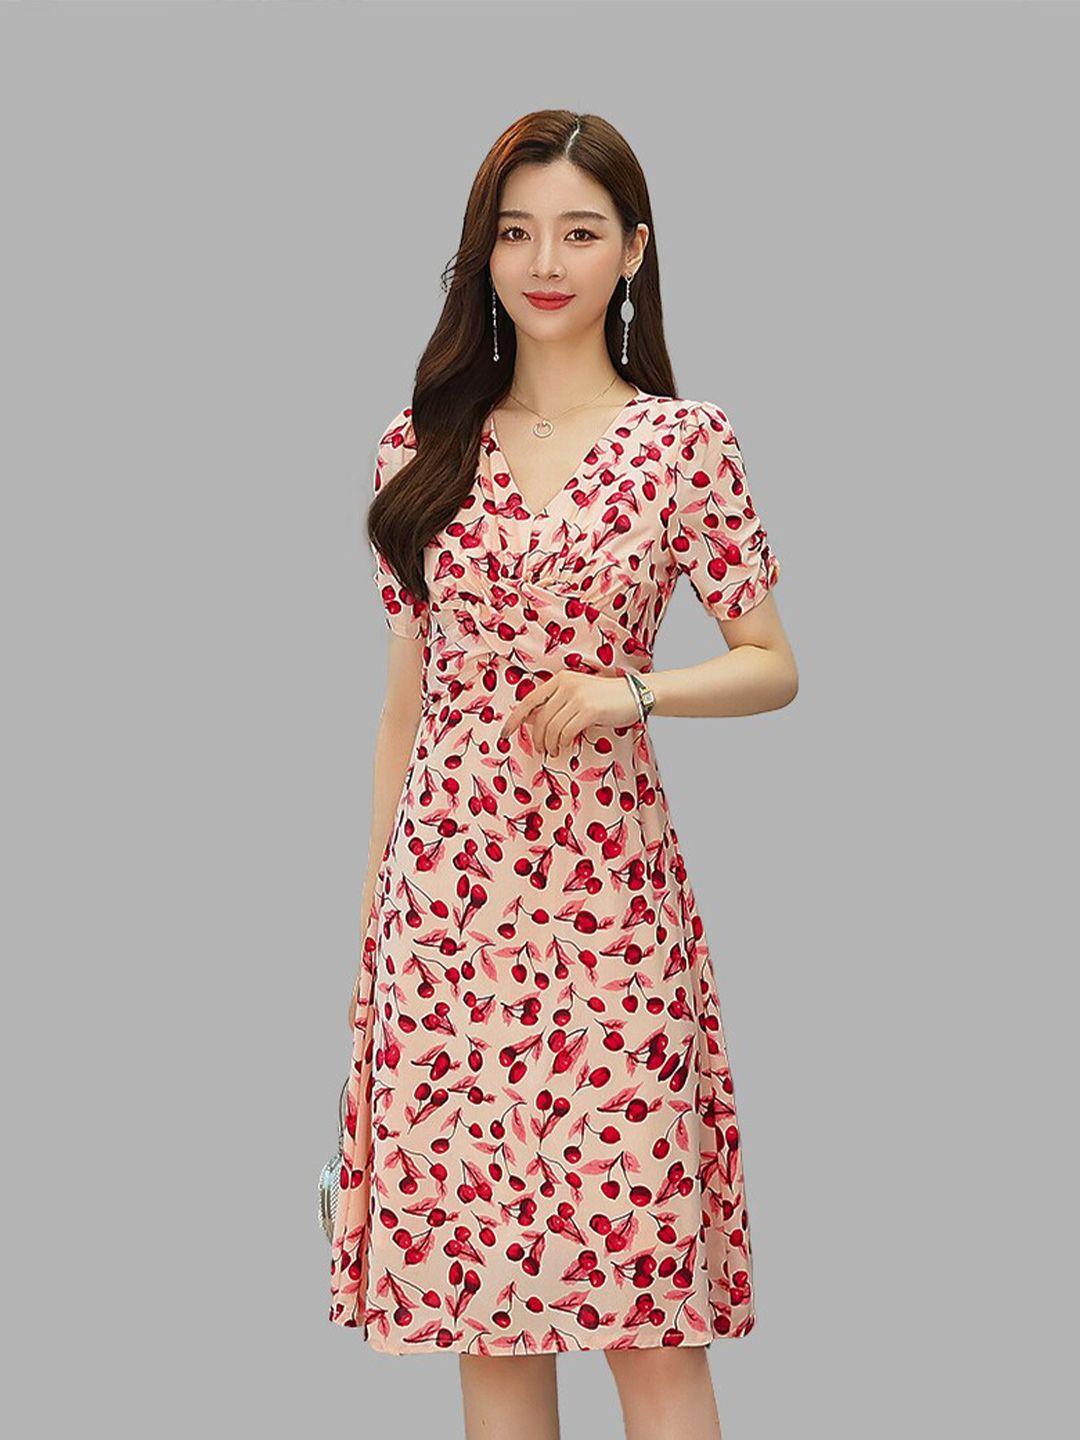 jc collection women red floral dress